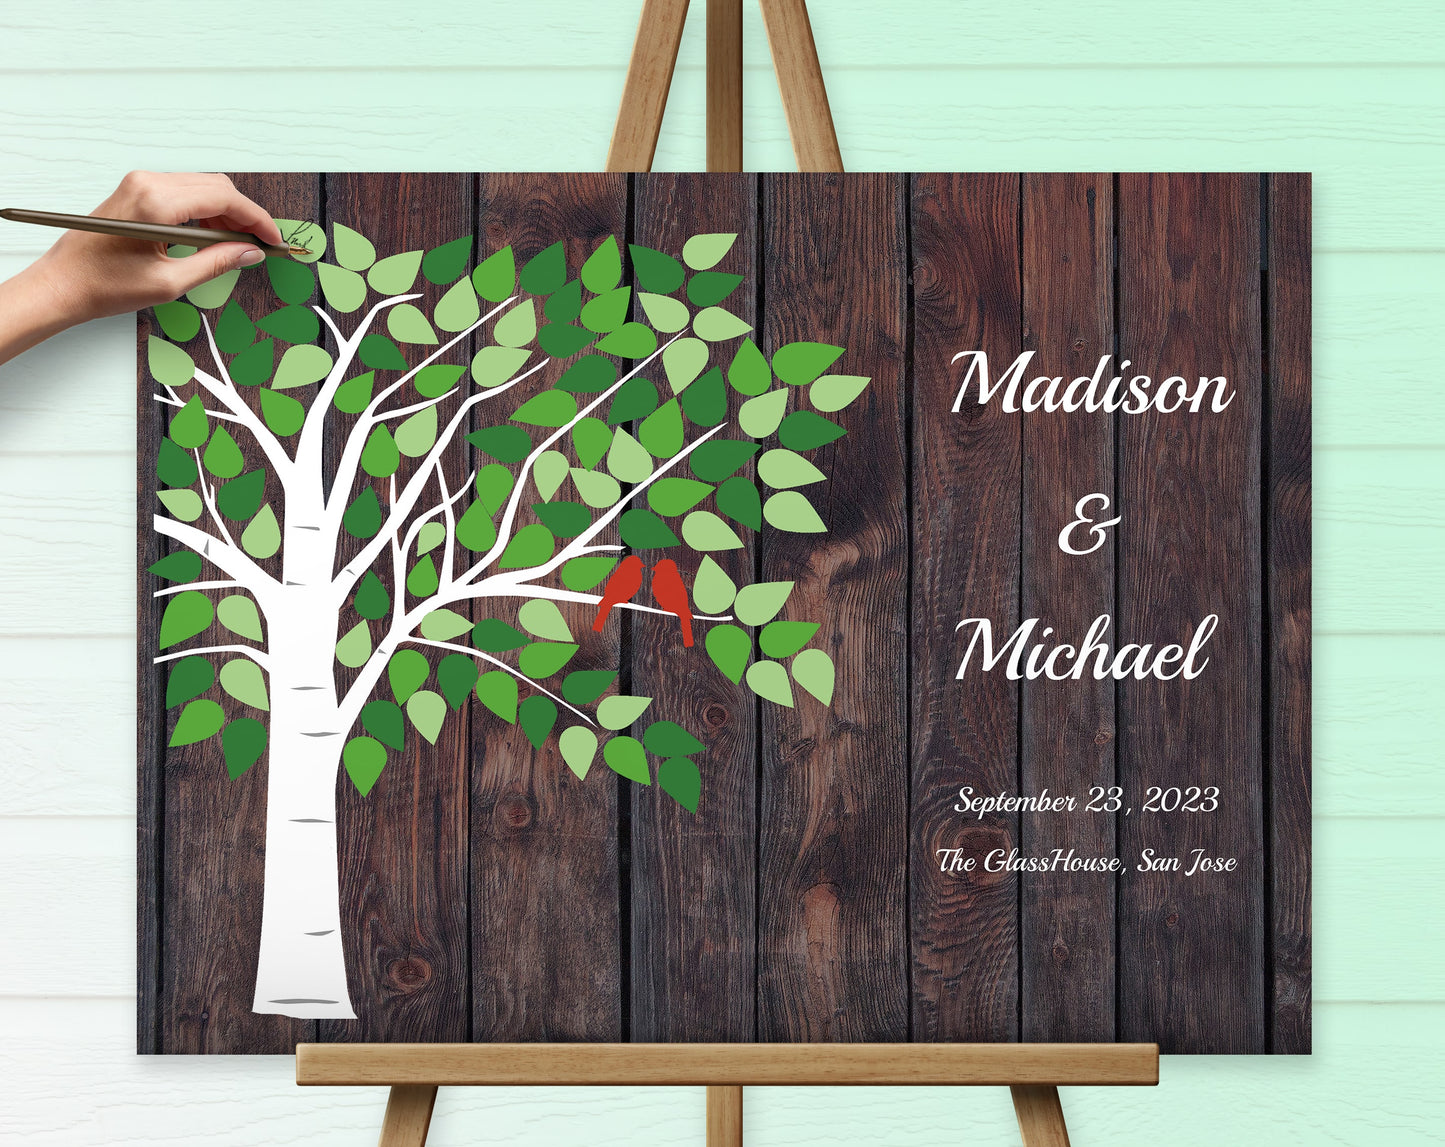 Personalized canvas guest book with wooden effect.